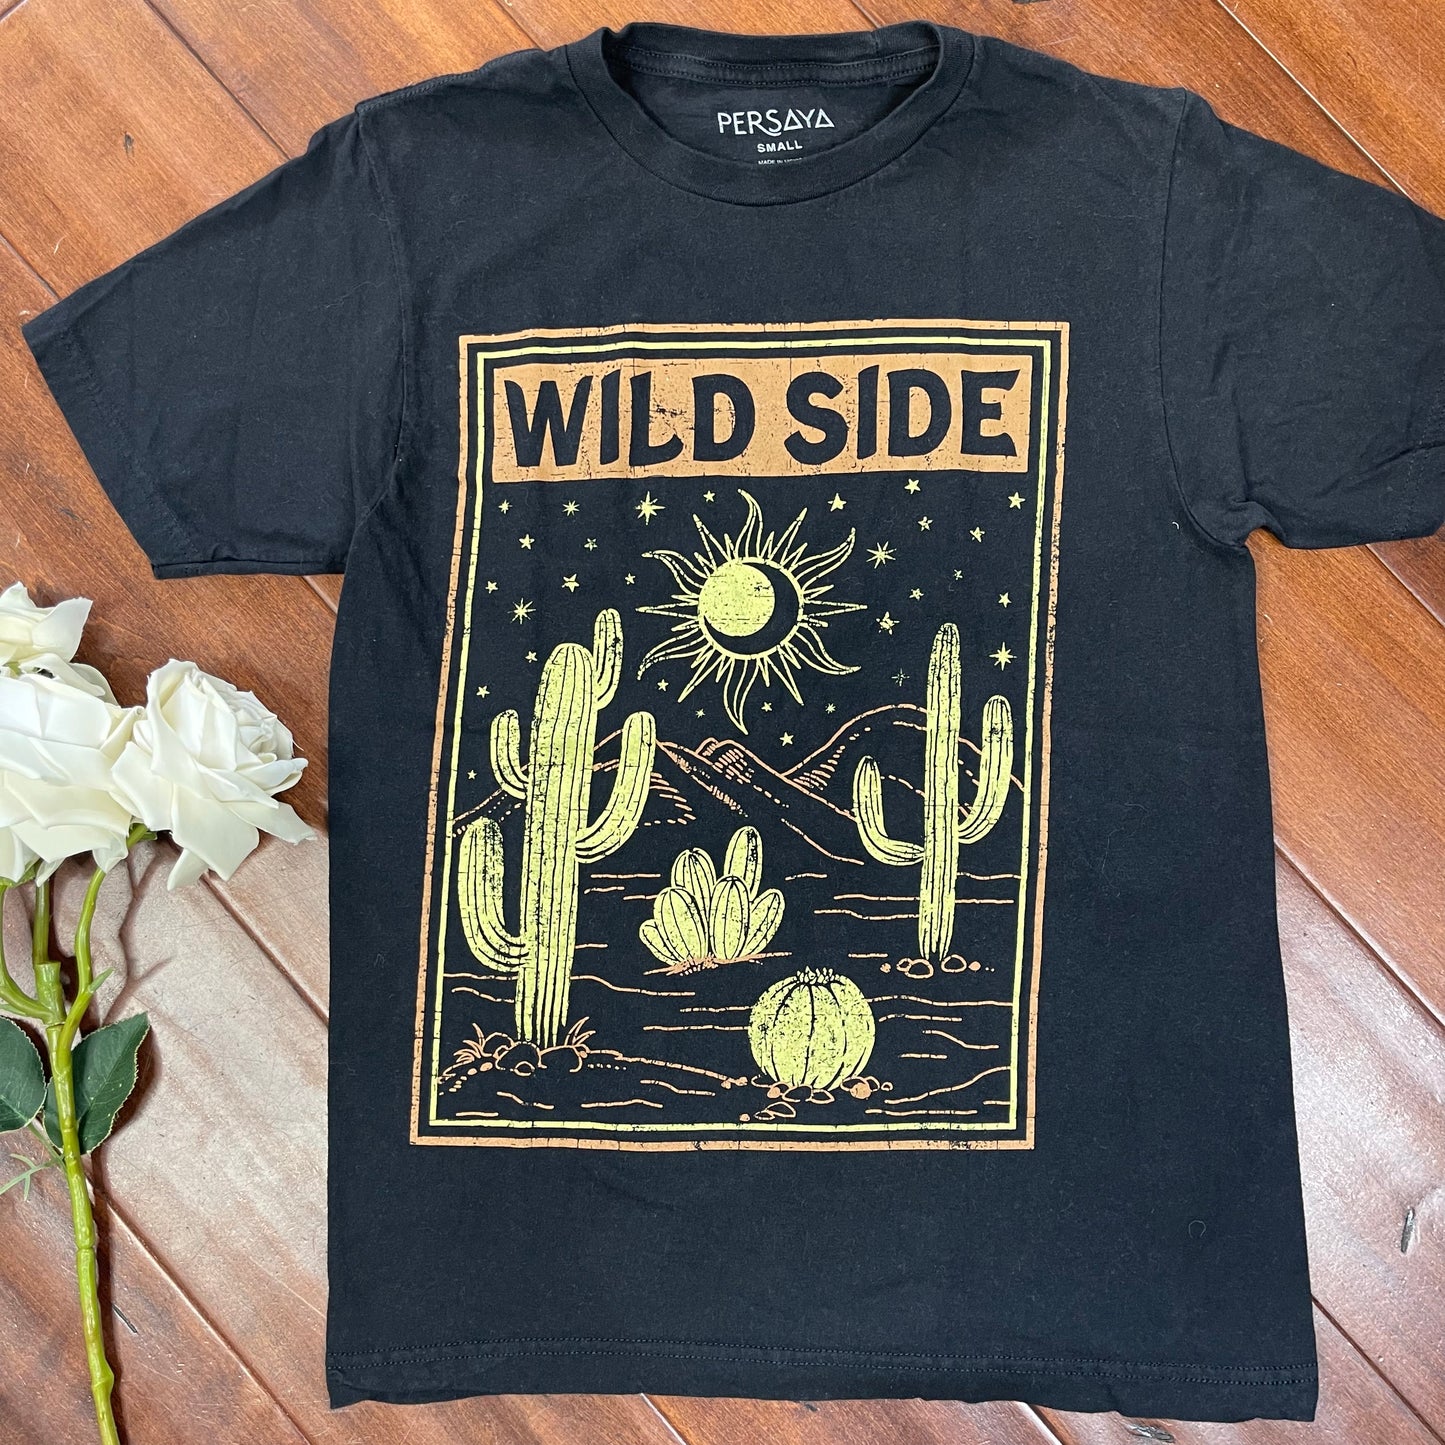 THRIFTED “WILD SIDE” T-SHIRT